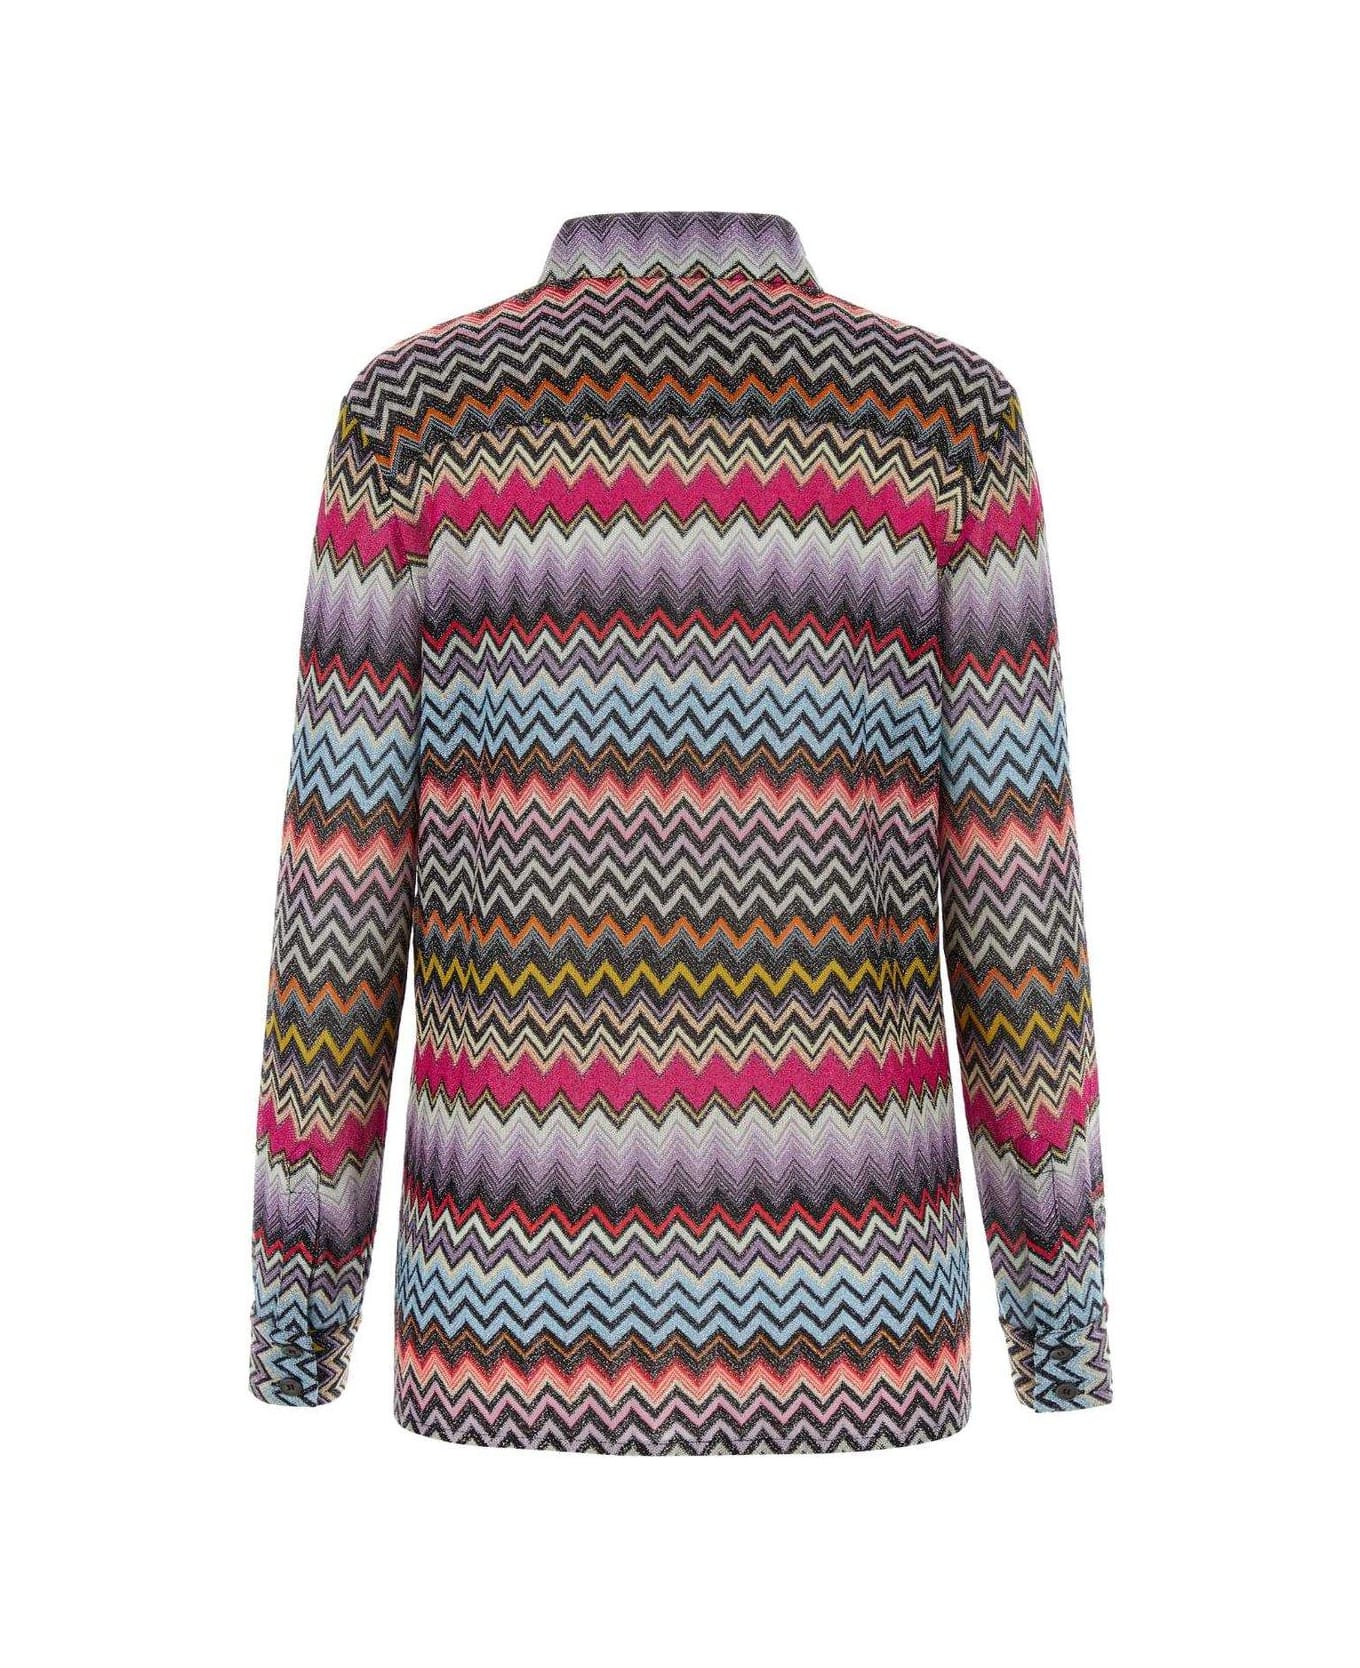 Missoni Patternede Embroidered Button-up Long-sleeved Shirt - Multicolor シャツ